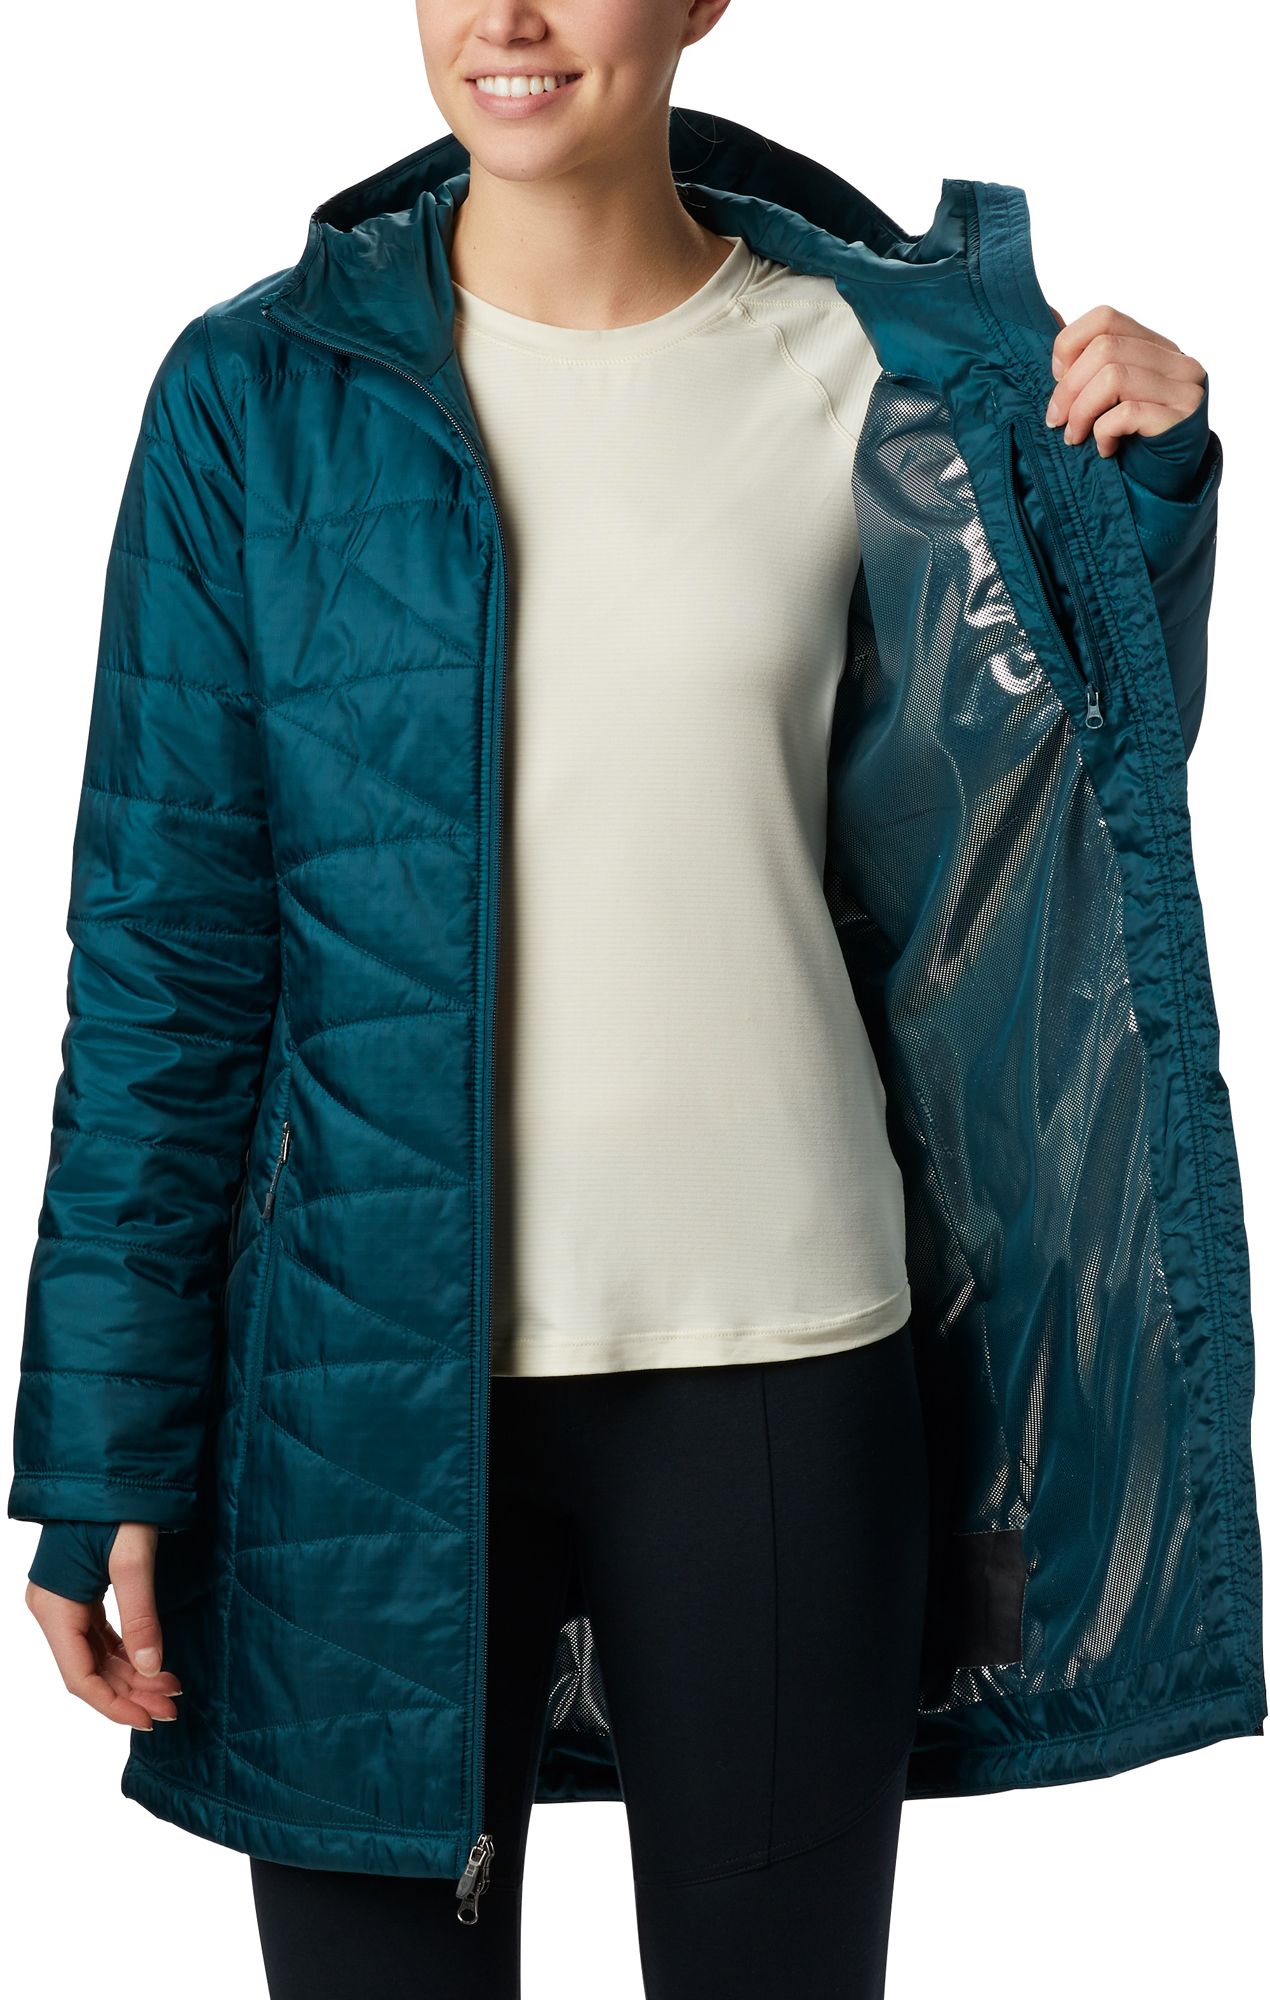 columbia mighty lite hooded jacket